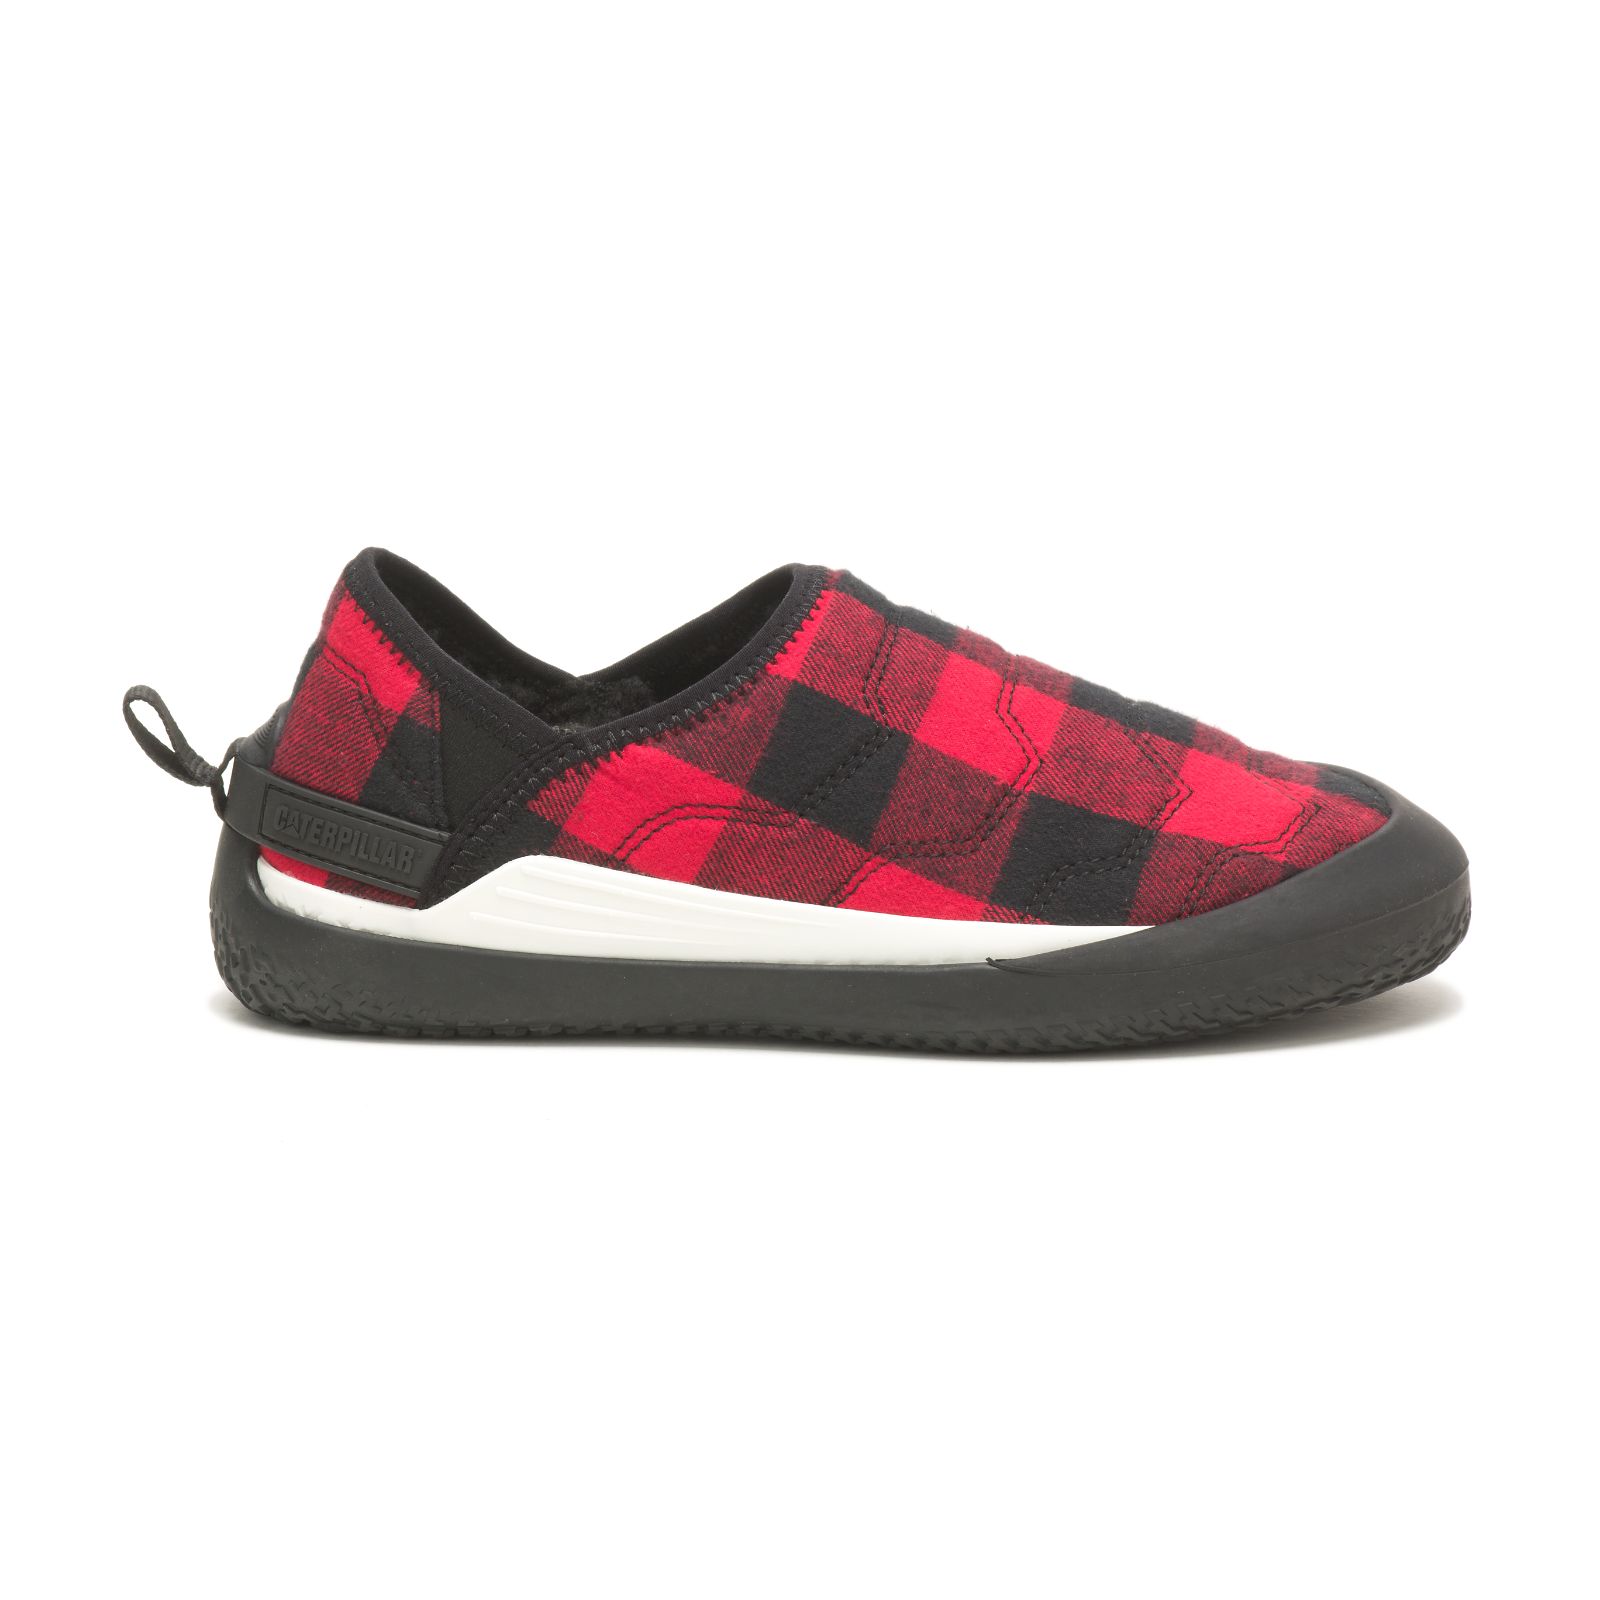 Caterpillar Shoes Online - Caterpillar Crossover Mens Slip On Shoes Red (368519-TLI)